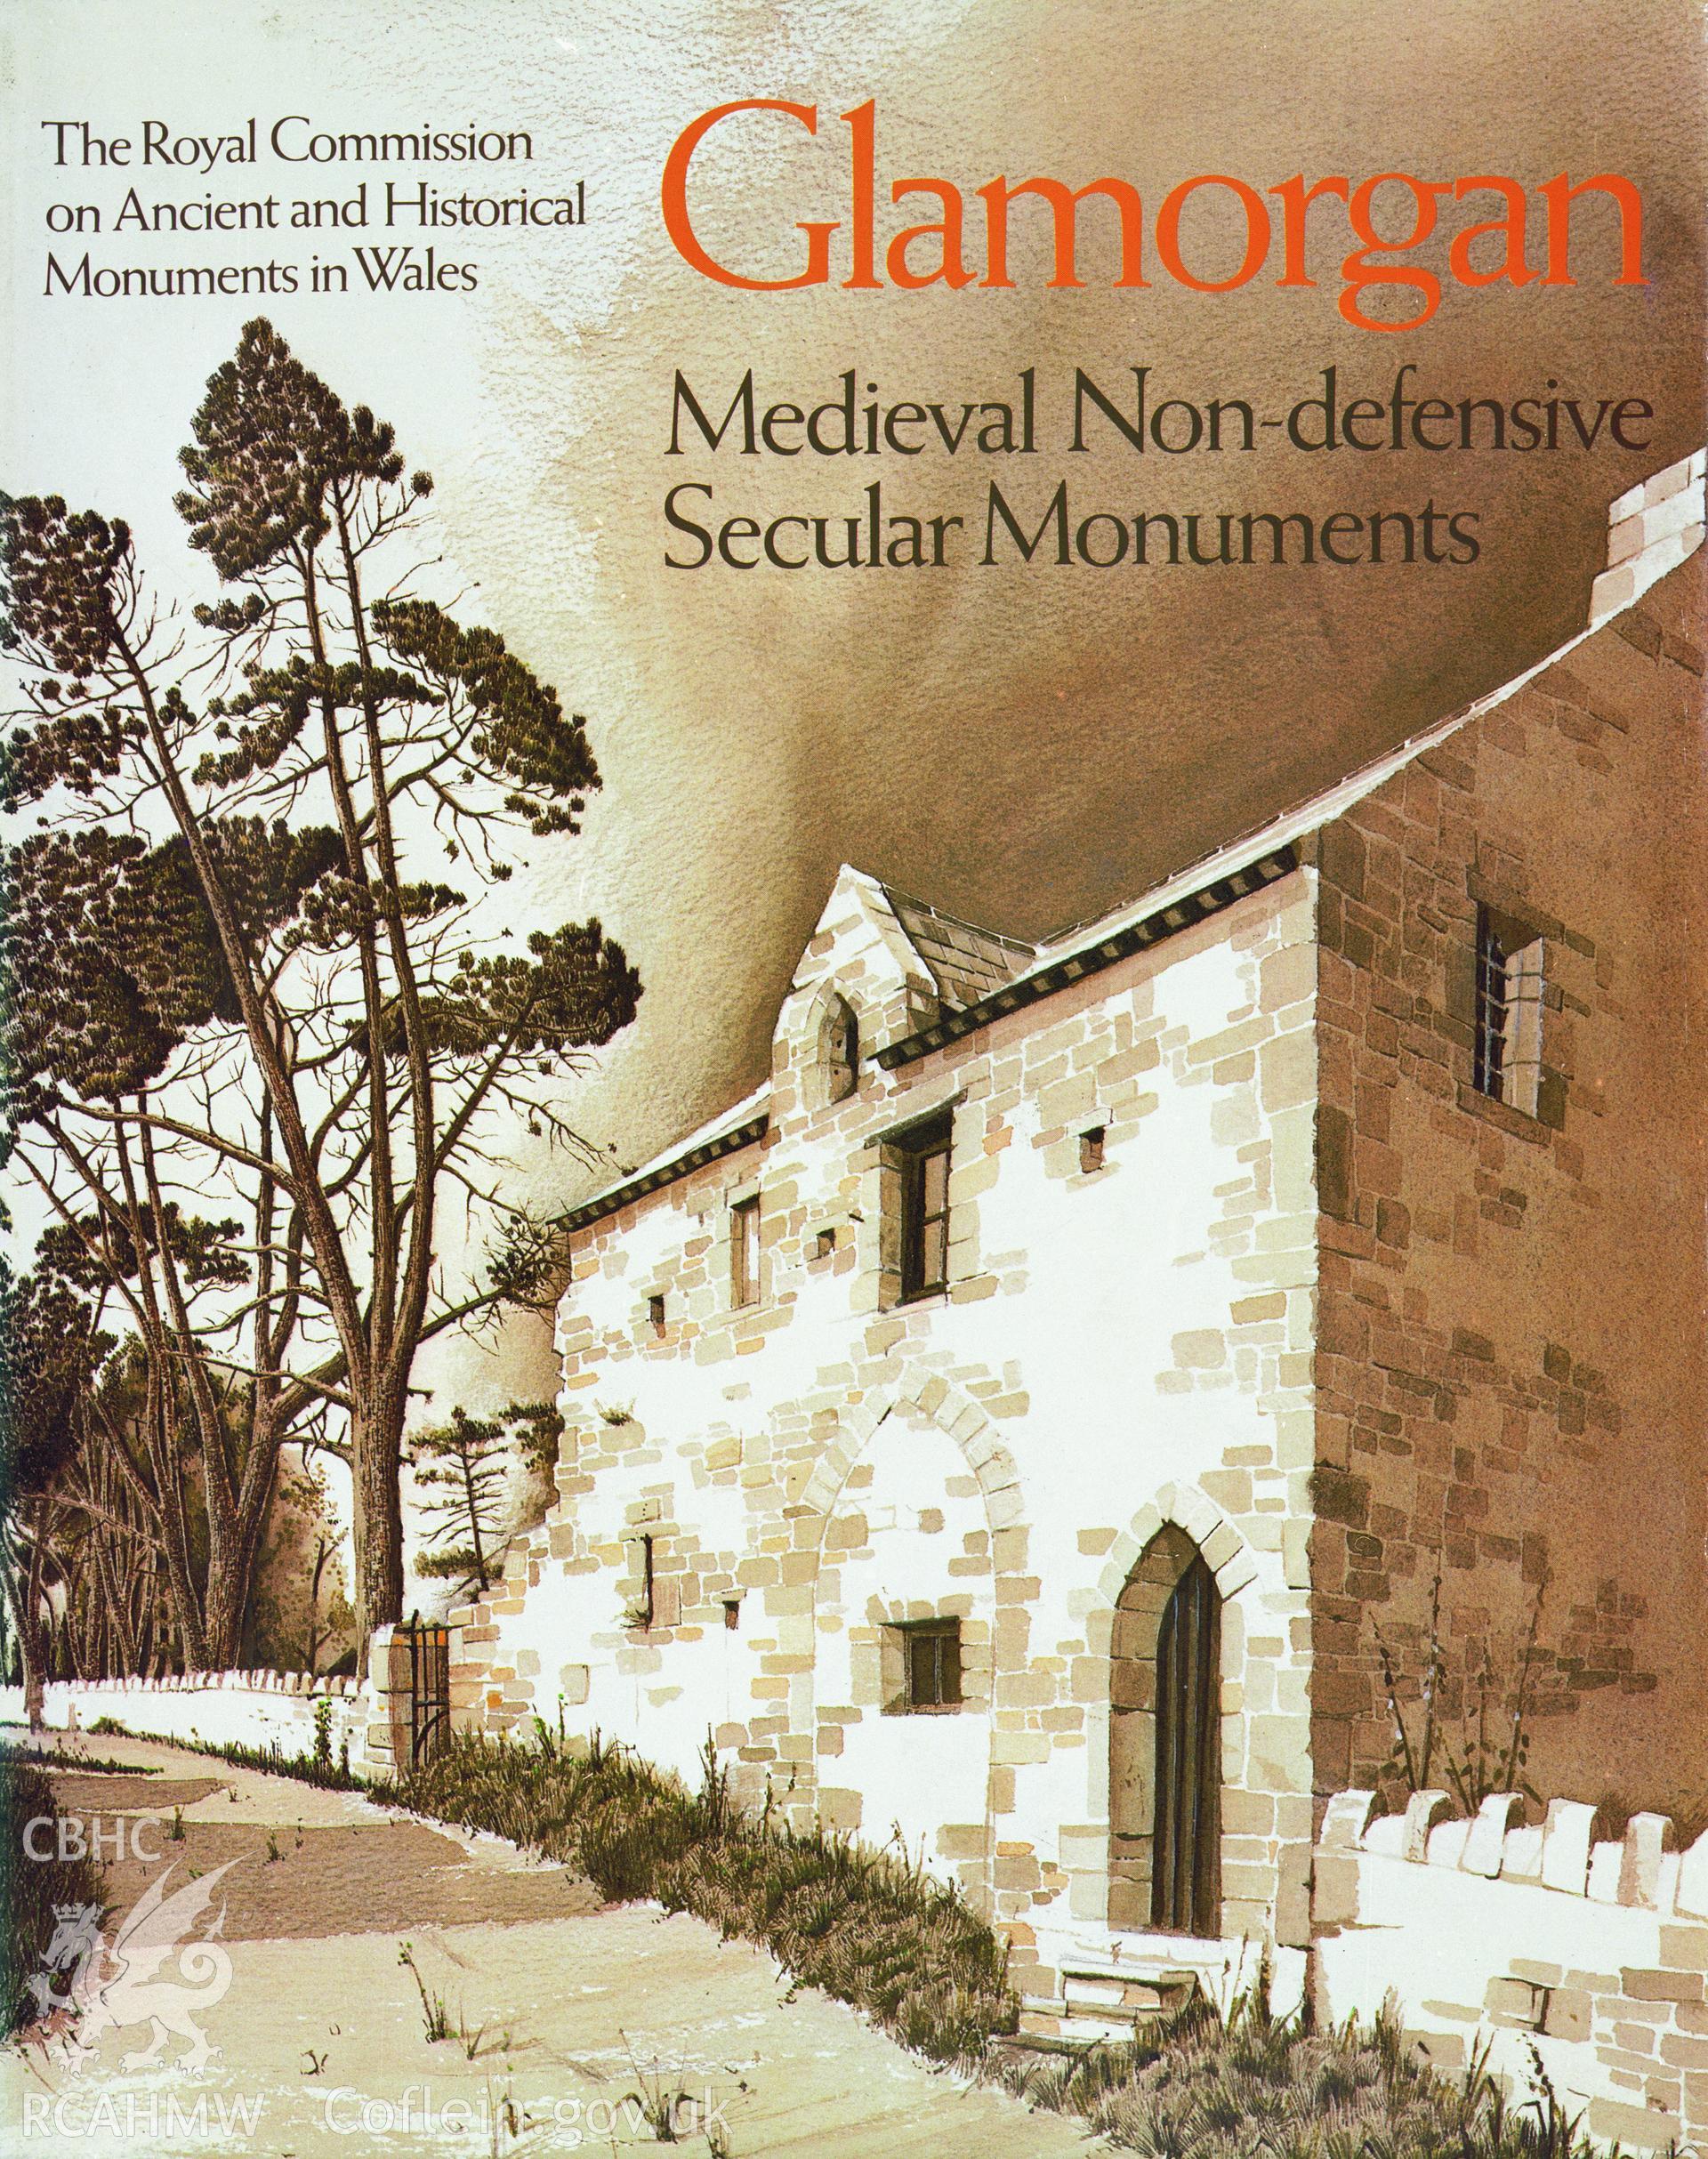 Colour transparency of the cover of the RCAHMW publication of Glamorgan Medieval Non-Defensive Secular Monuments.